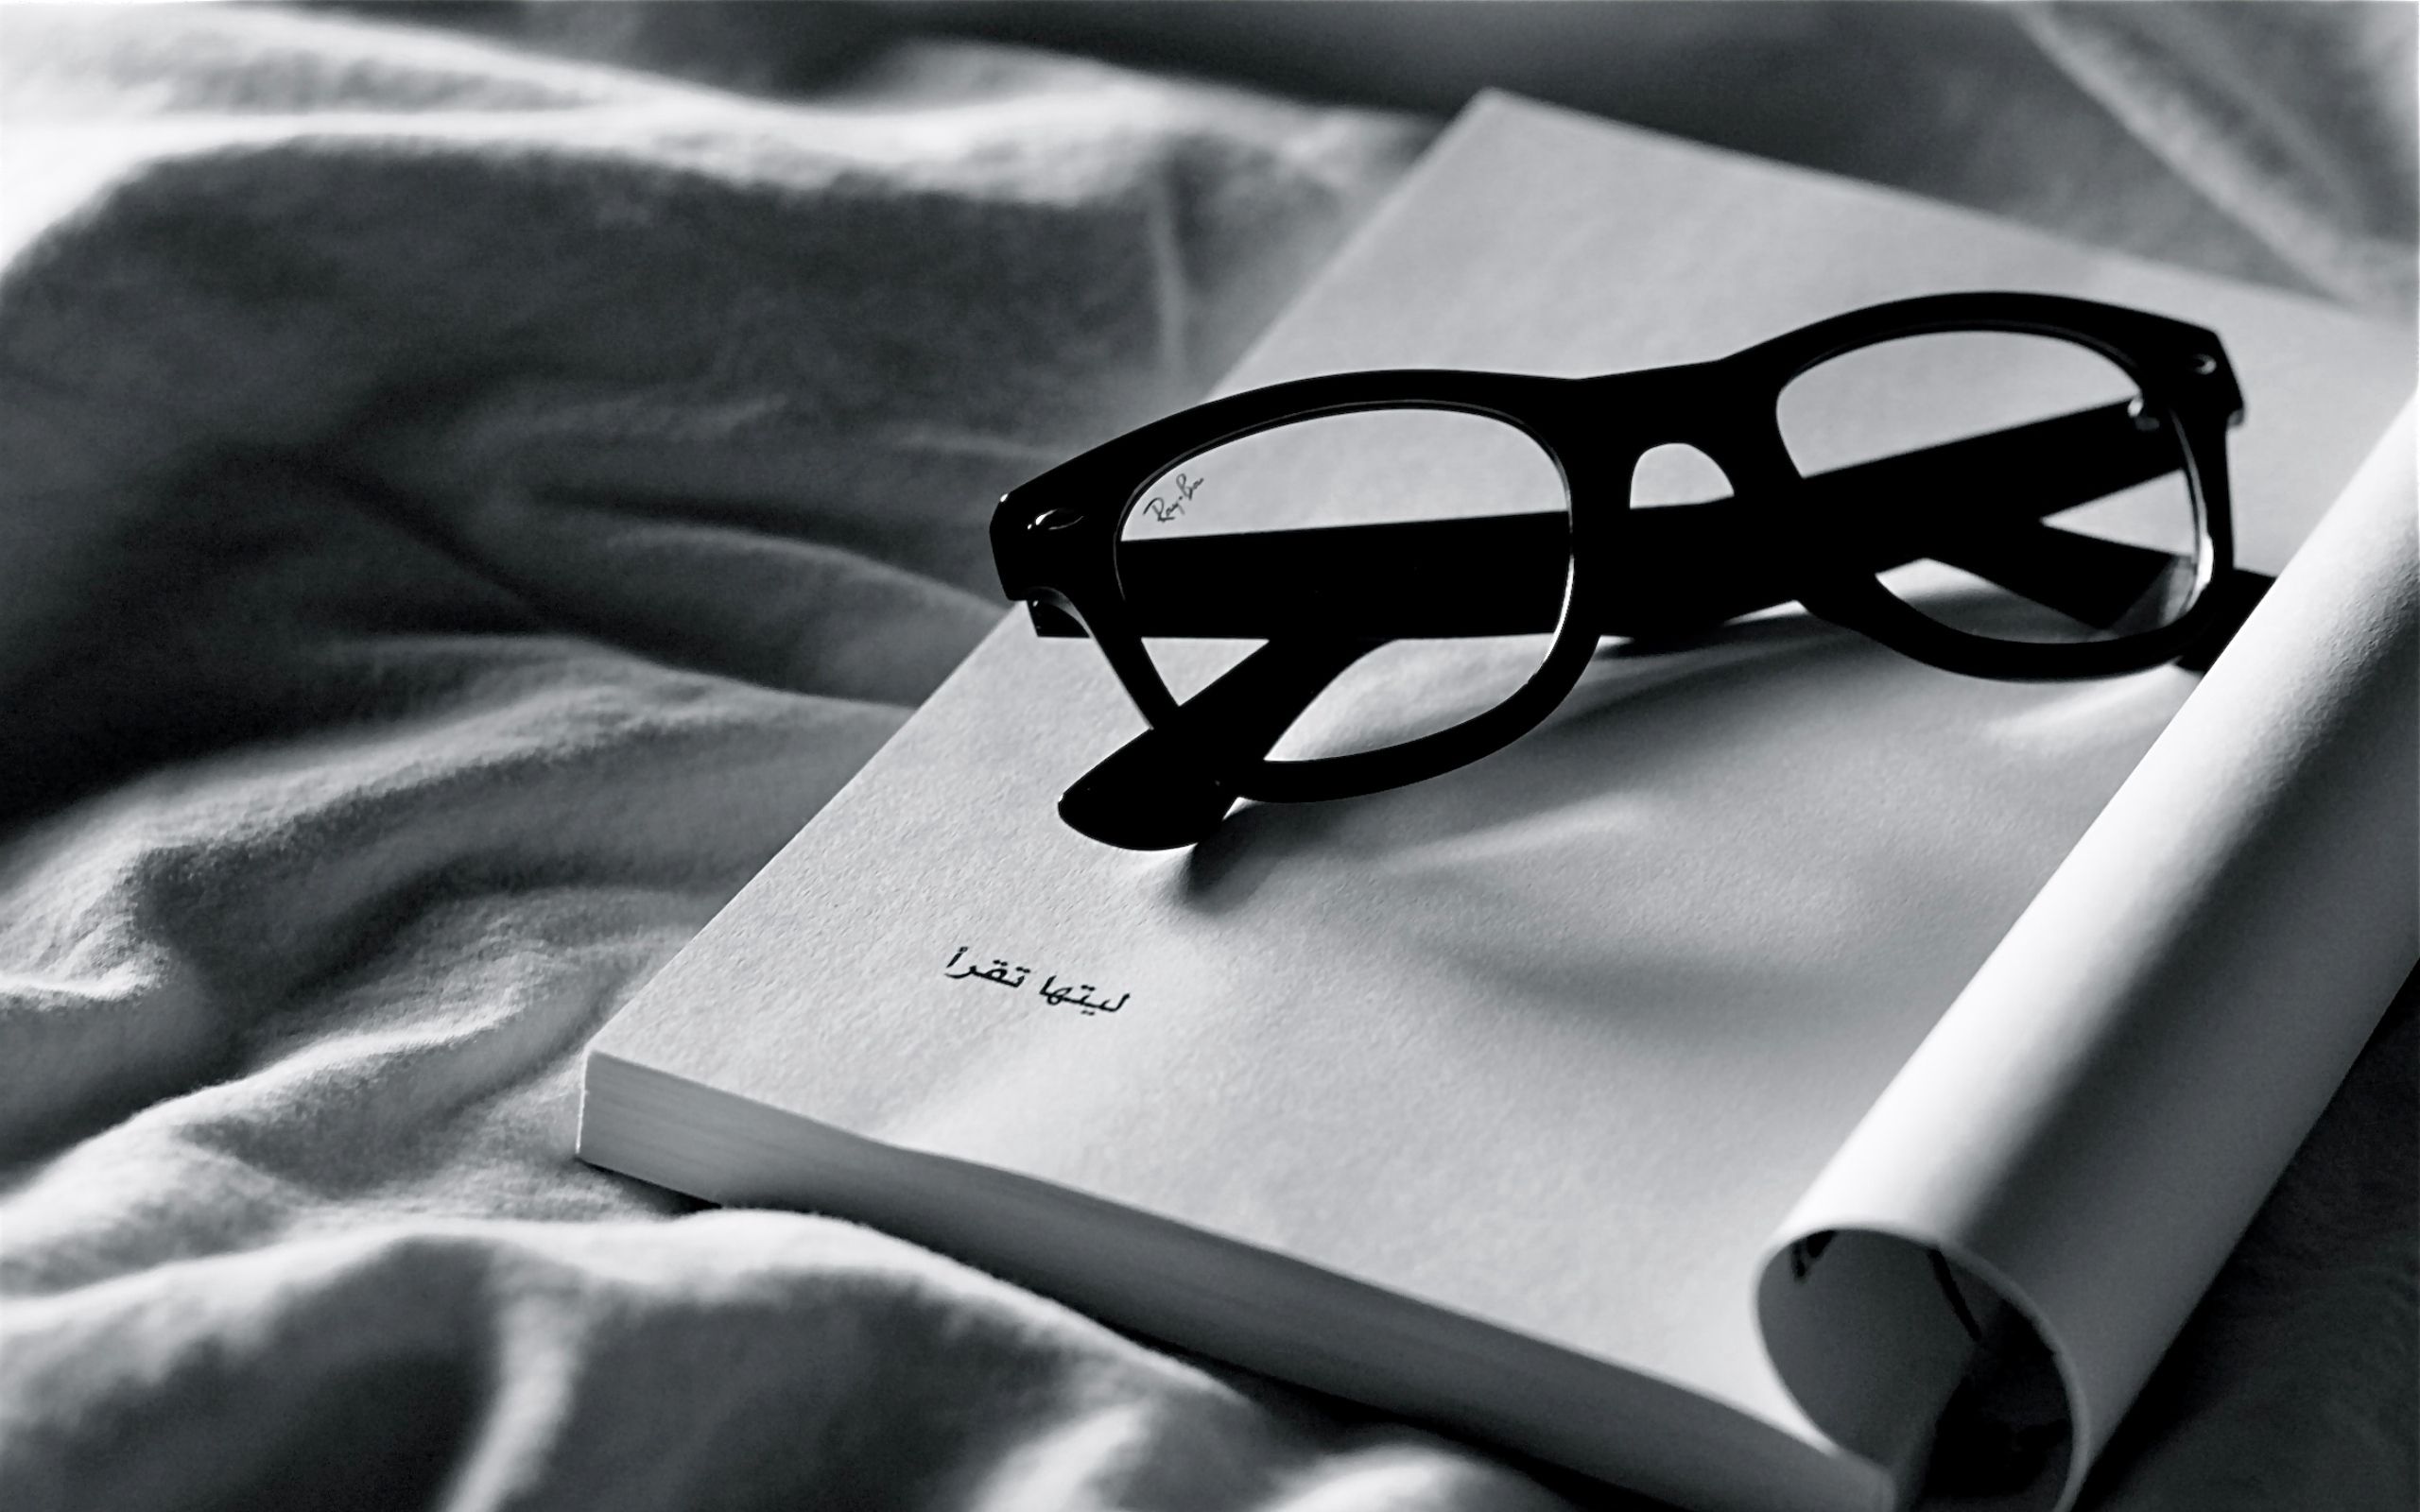 Smartphone Background spectacles, miscellanea, cloth, glasses